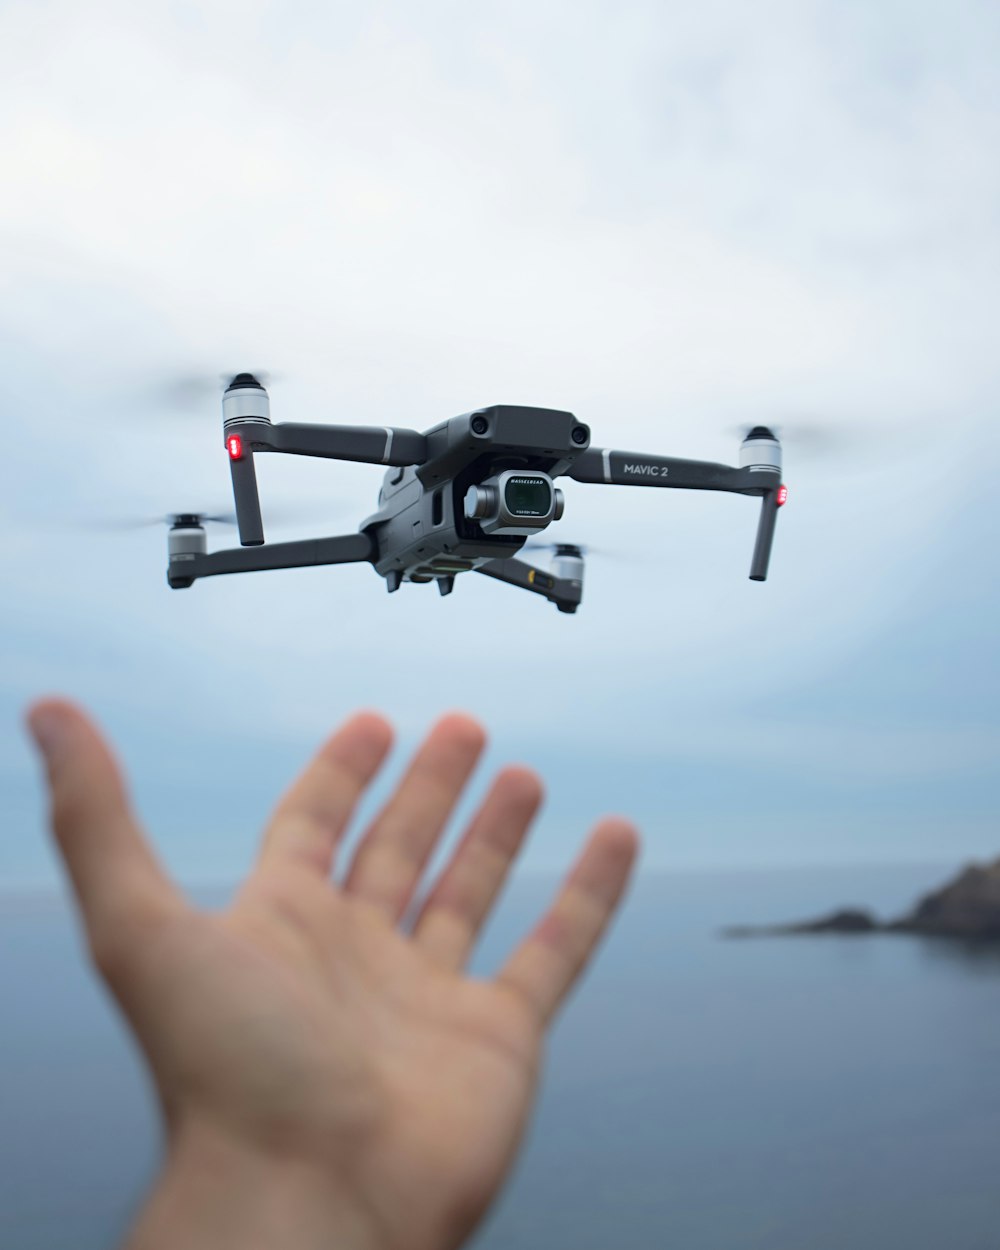 a hand holding a black and white remote control flying over a body of water